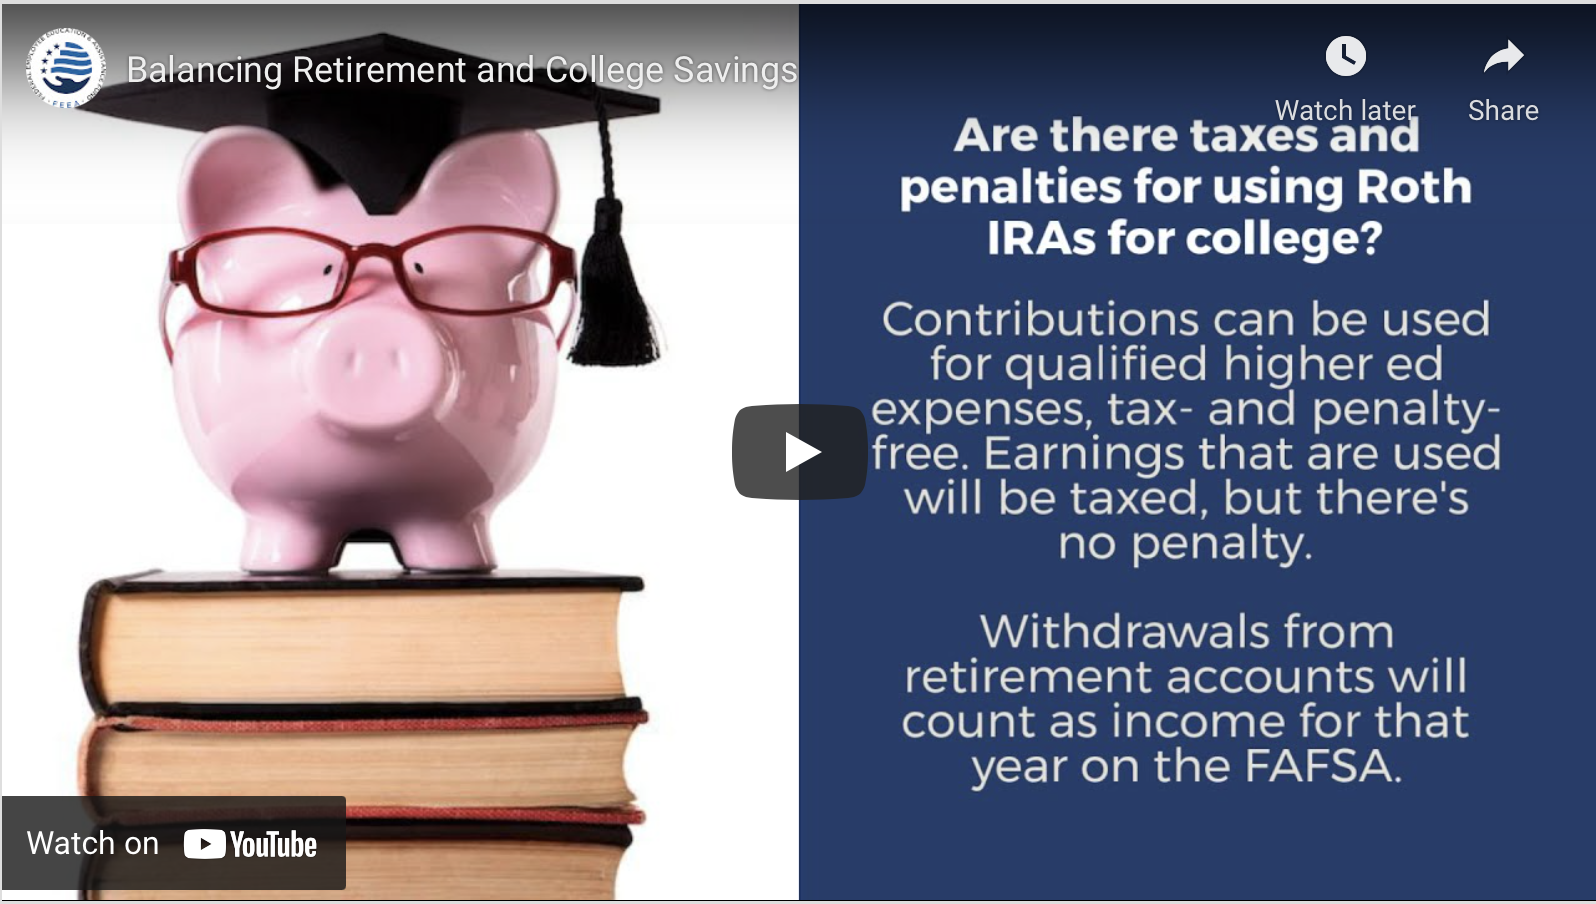 Featured Image for post: Video: Balancing Saving for Retirement and College